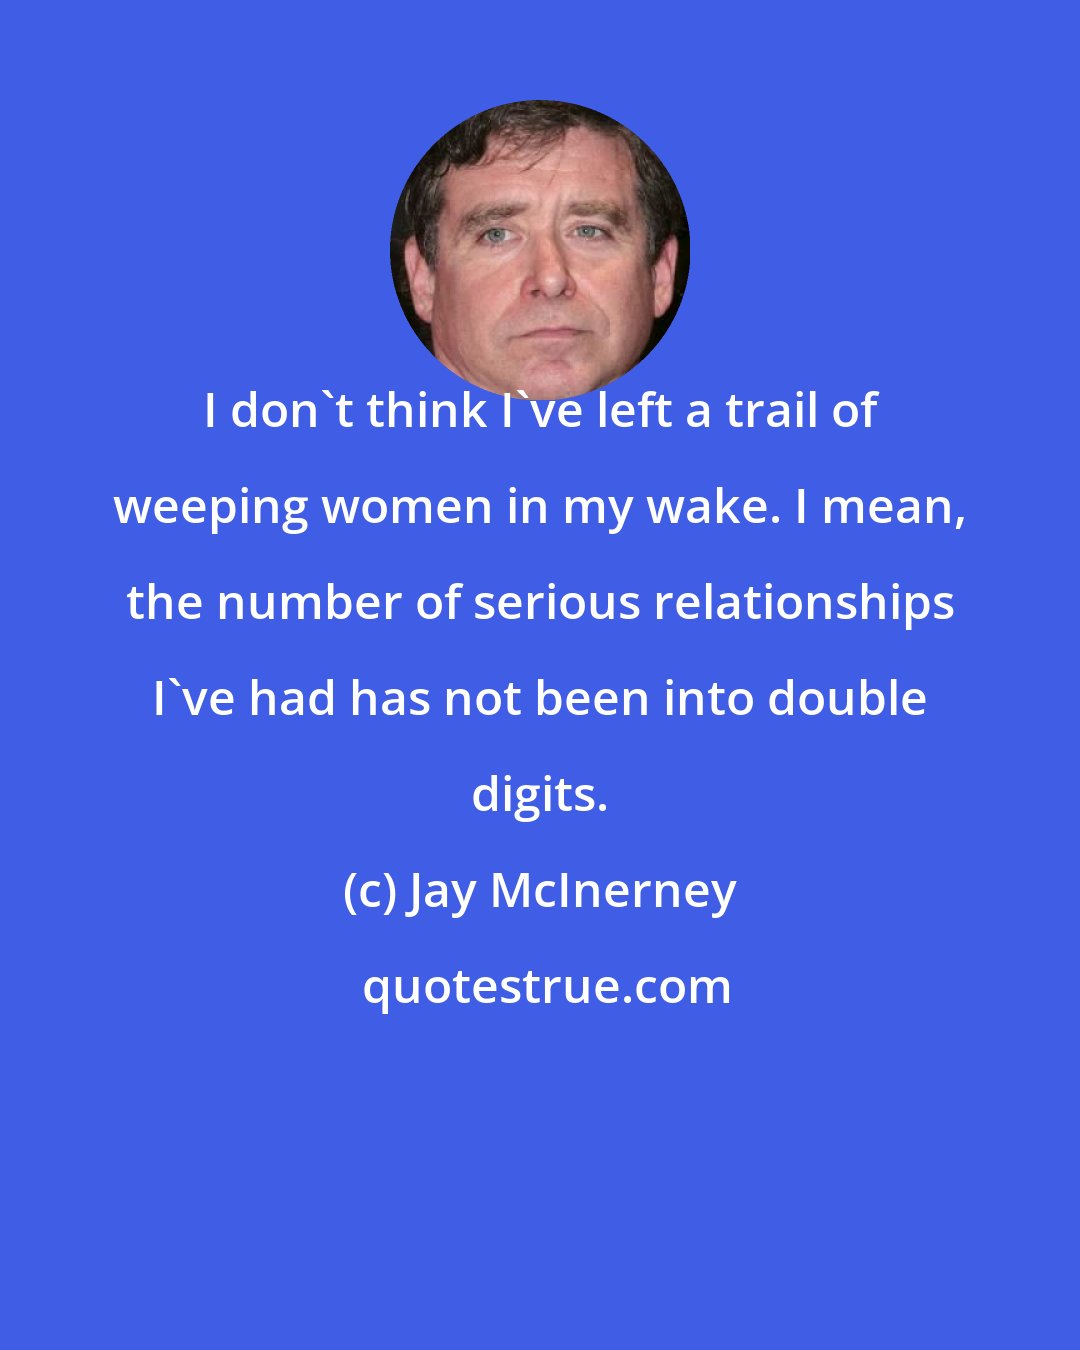 Jay McInerney: I don't think I've left a trail of weeping women in my wake. I mean, the number of serious relationships I've had has not been into double digits.